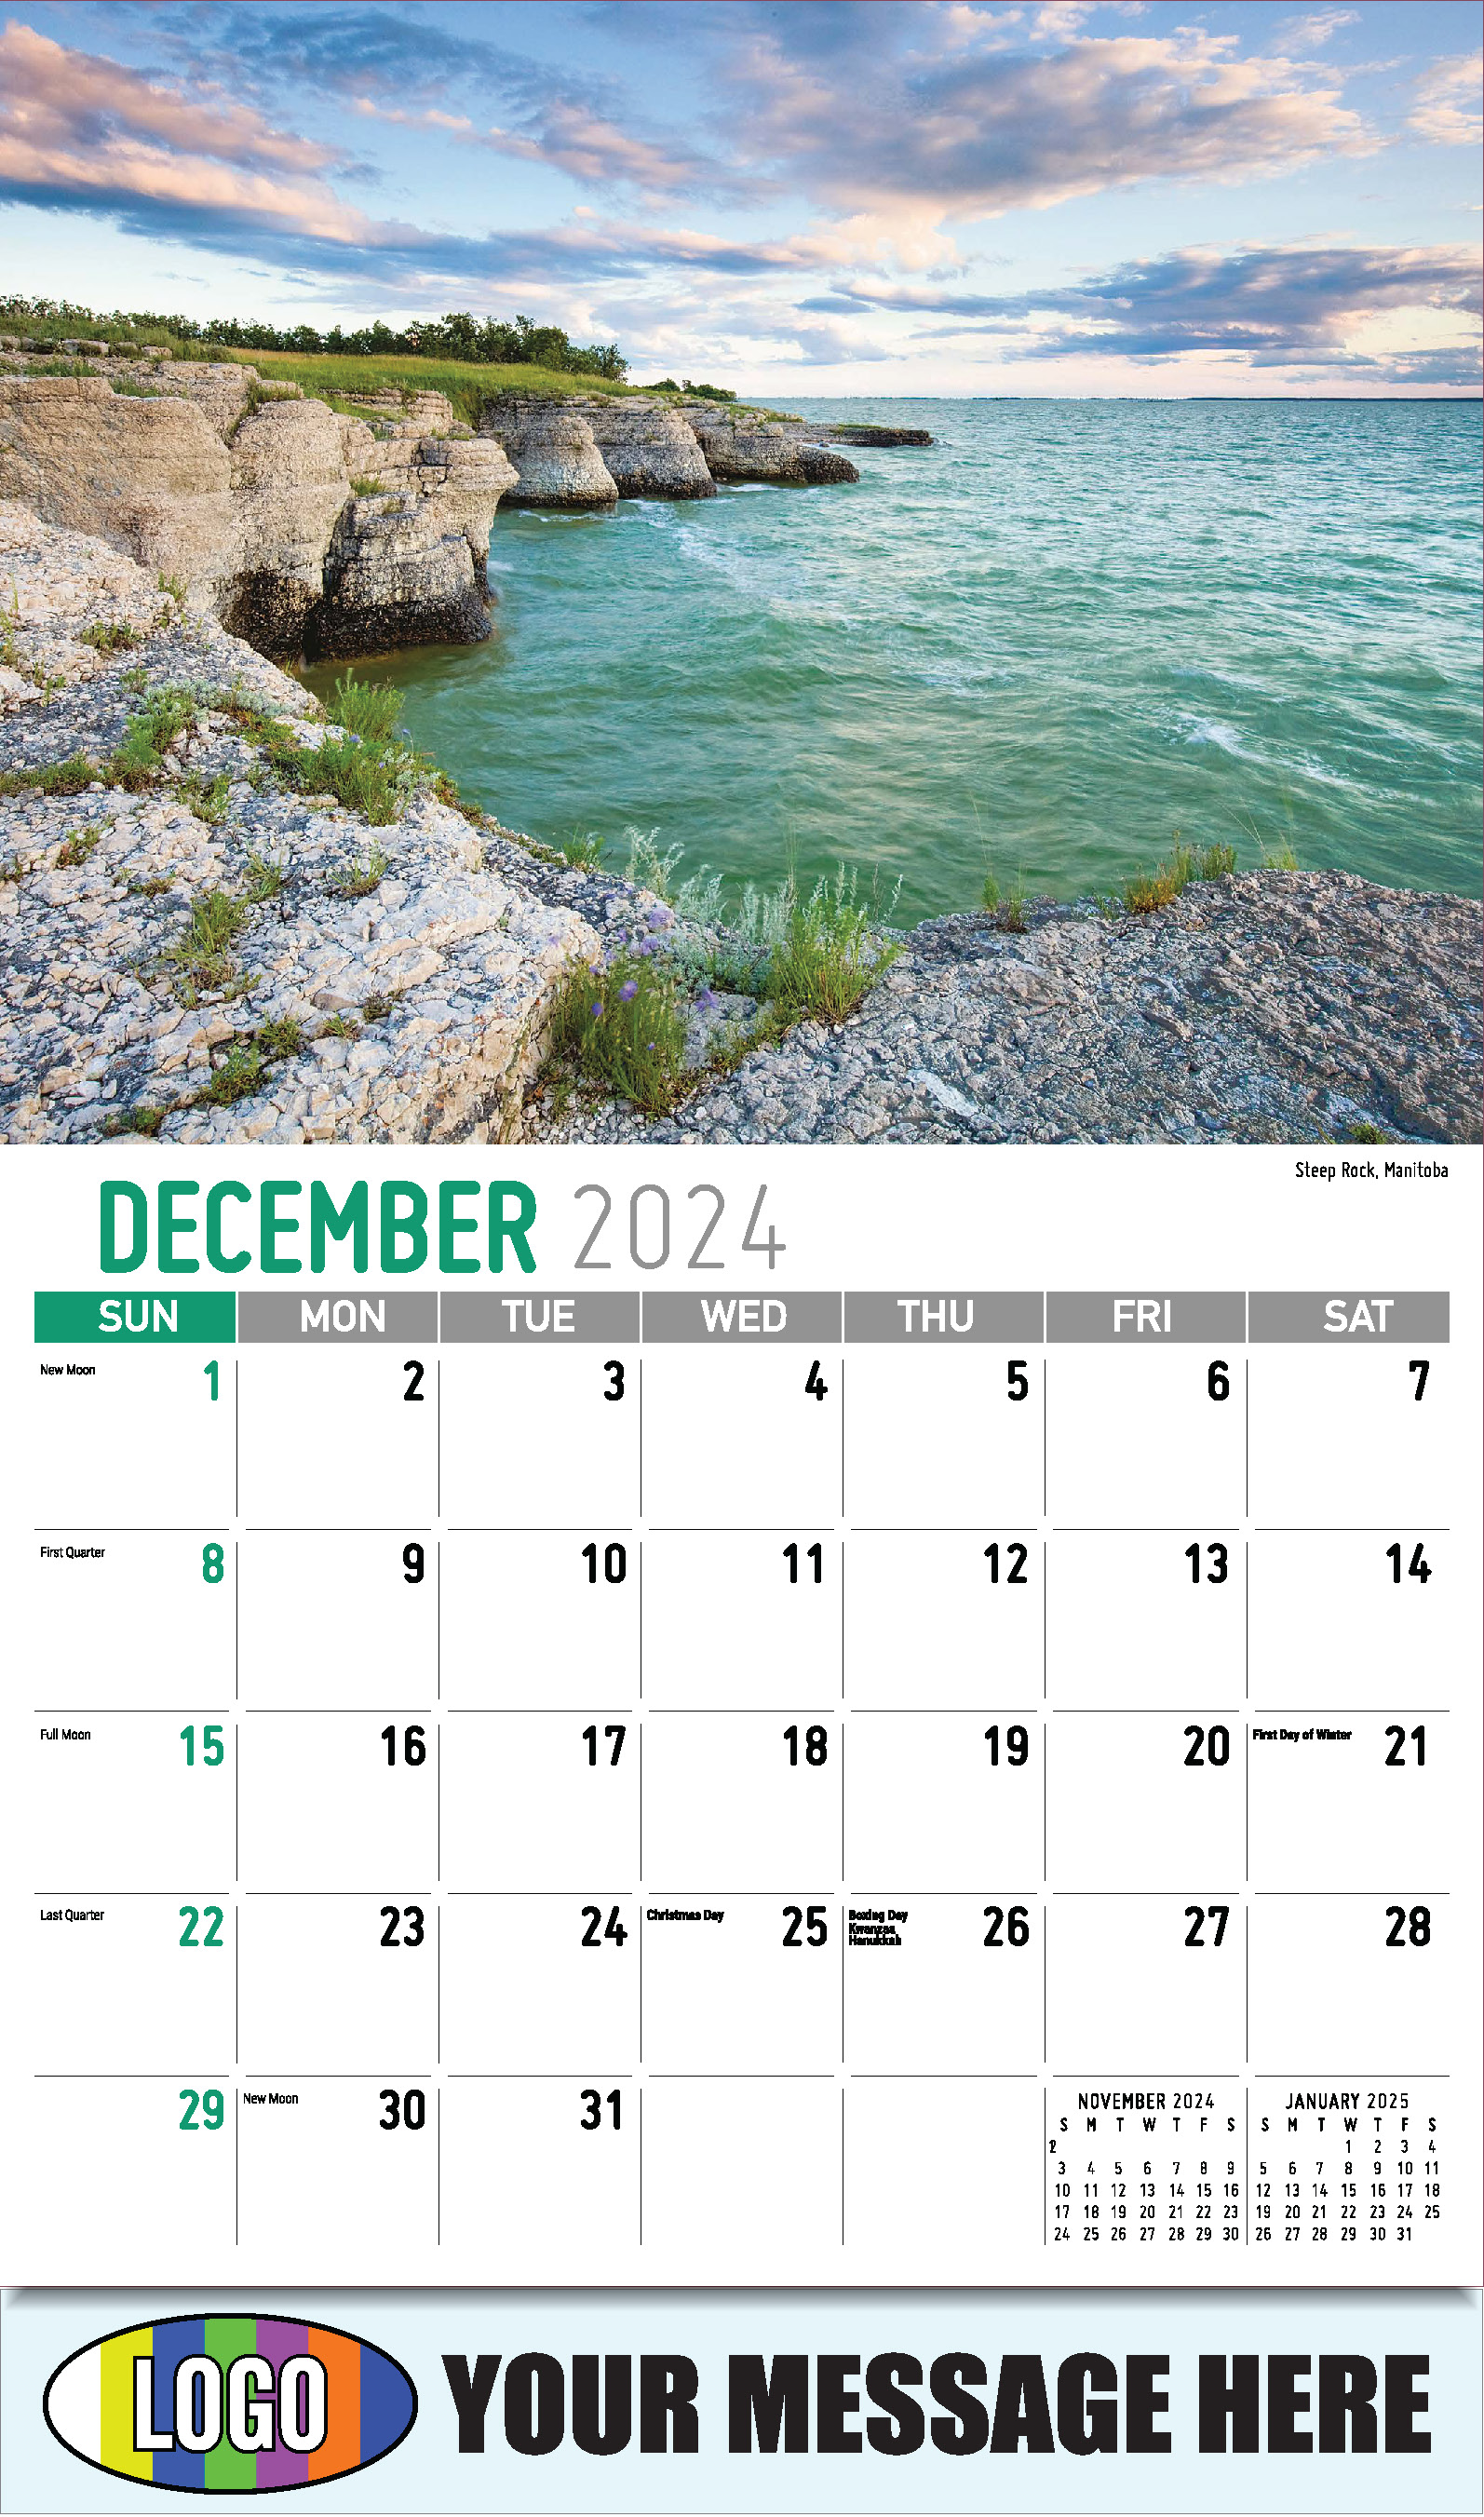 Scenes of Western Canada 2025 Business Promotional Wall Calendar - December_a